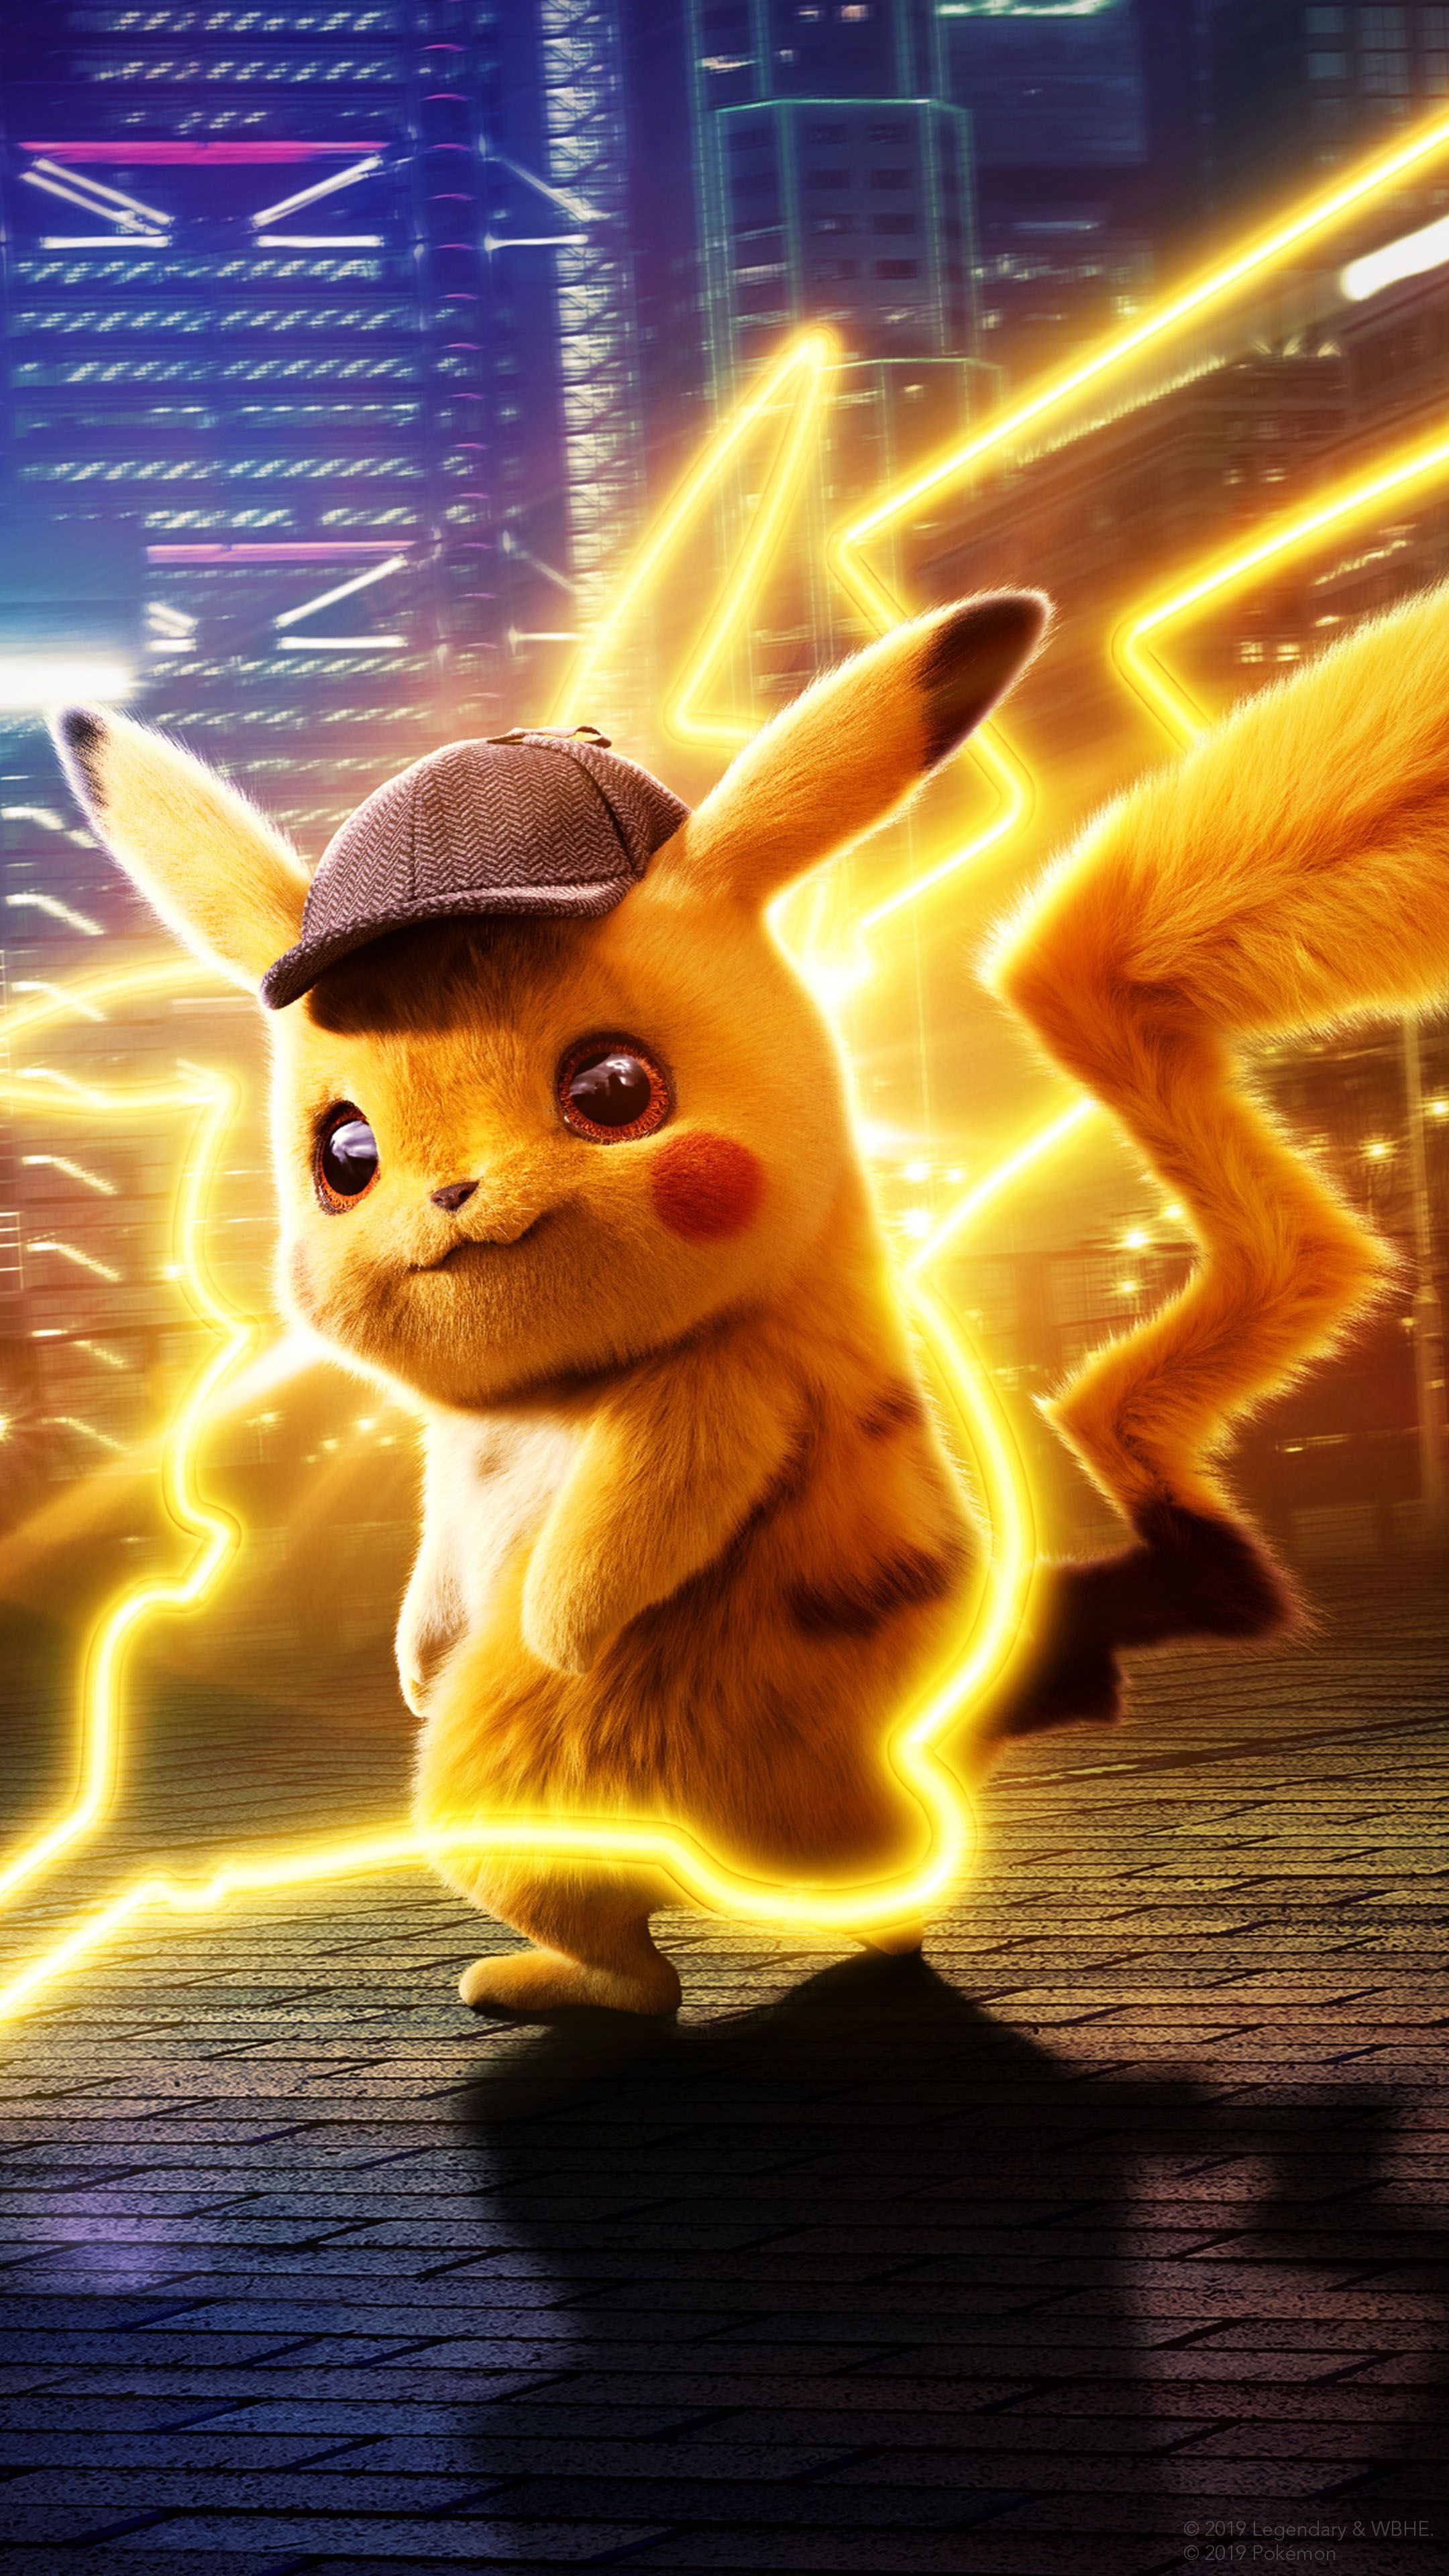 Pokemon Detective Pikachu: The film is a loose adaptation of the 2016 video game of the same name. 2160x3840 4K Background.